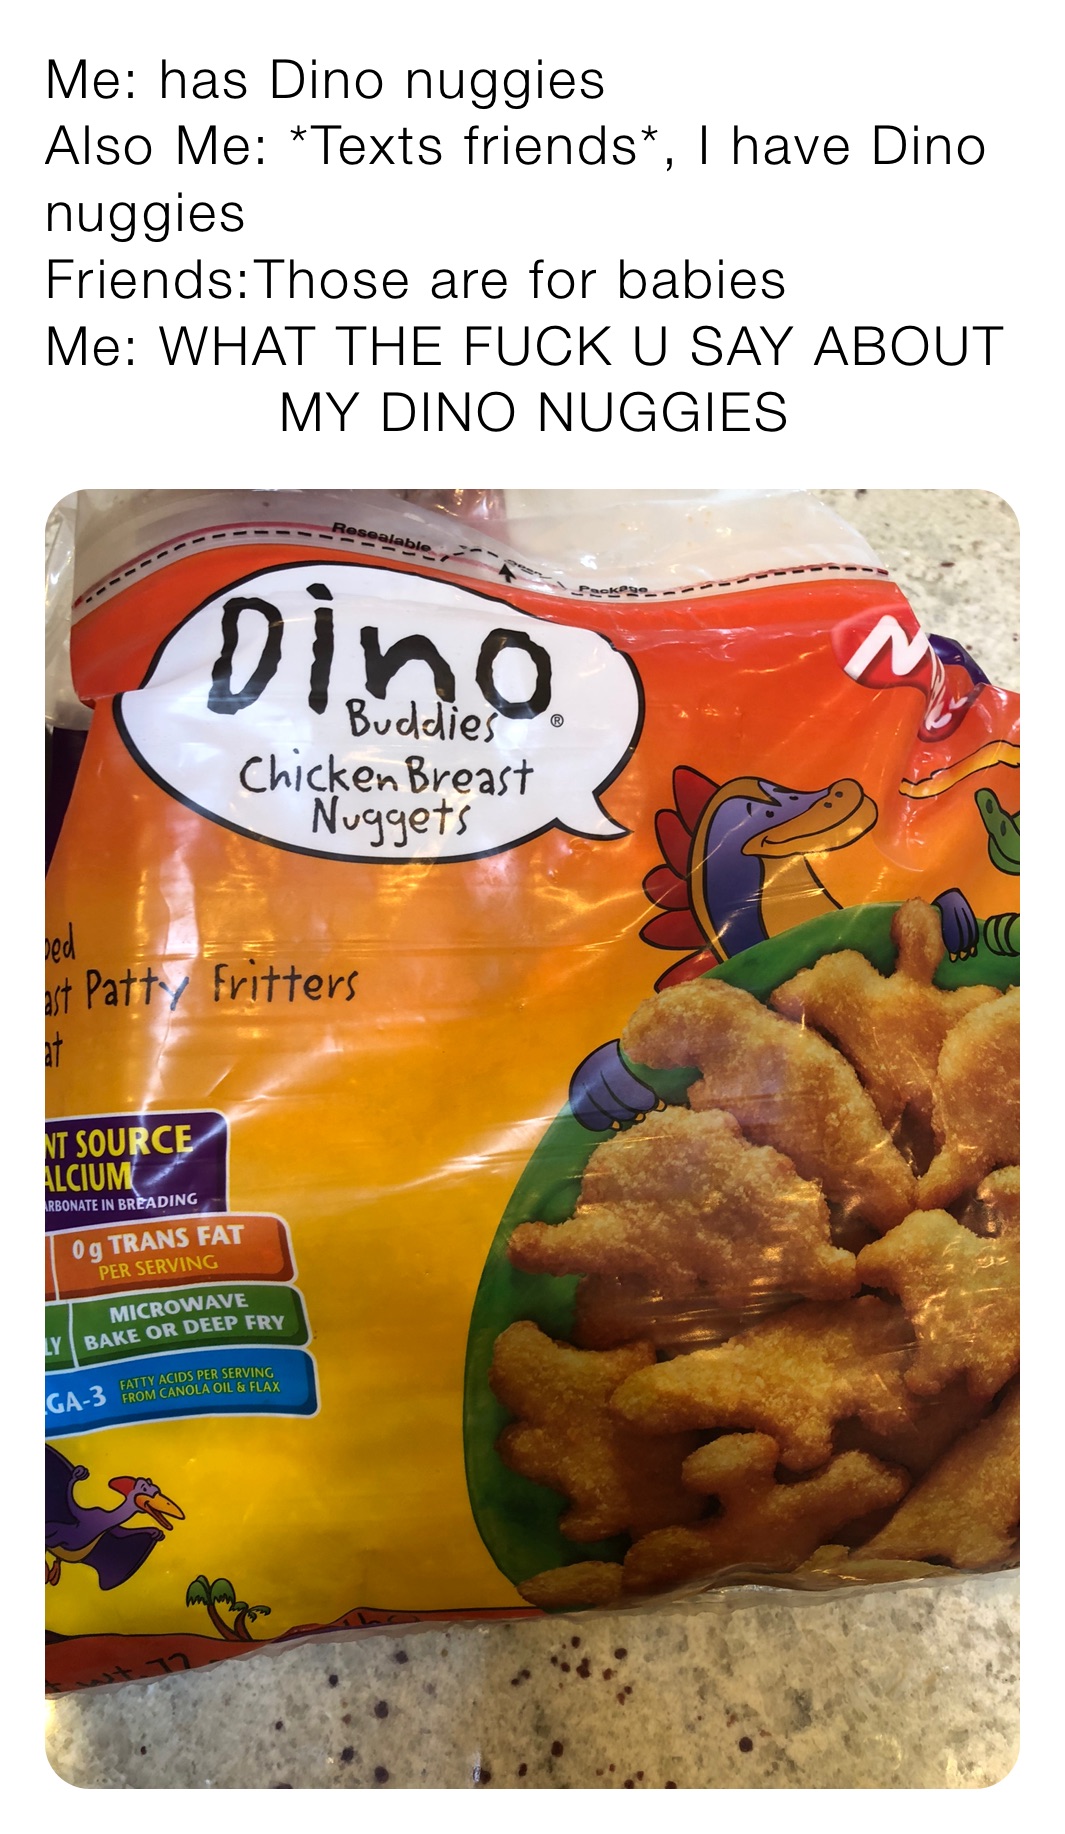 Me: has Dino nuggies
Also Me: *Texts friends*, I have Dino nuggies
Friends:Those are for babies
Me: WHAT THE FUCK U SAY ABOUT 
             MY DINO NUGGIES